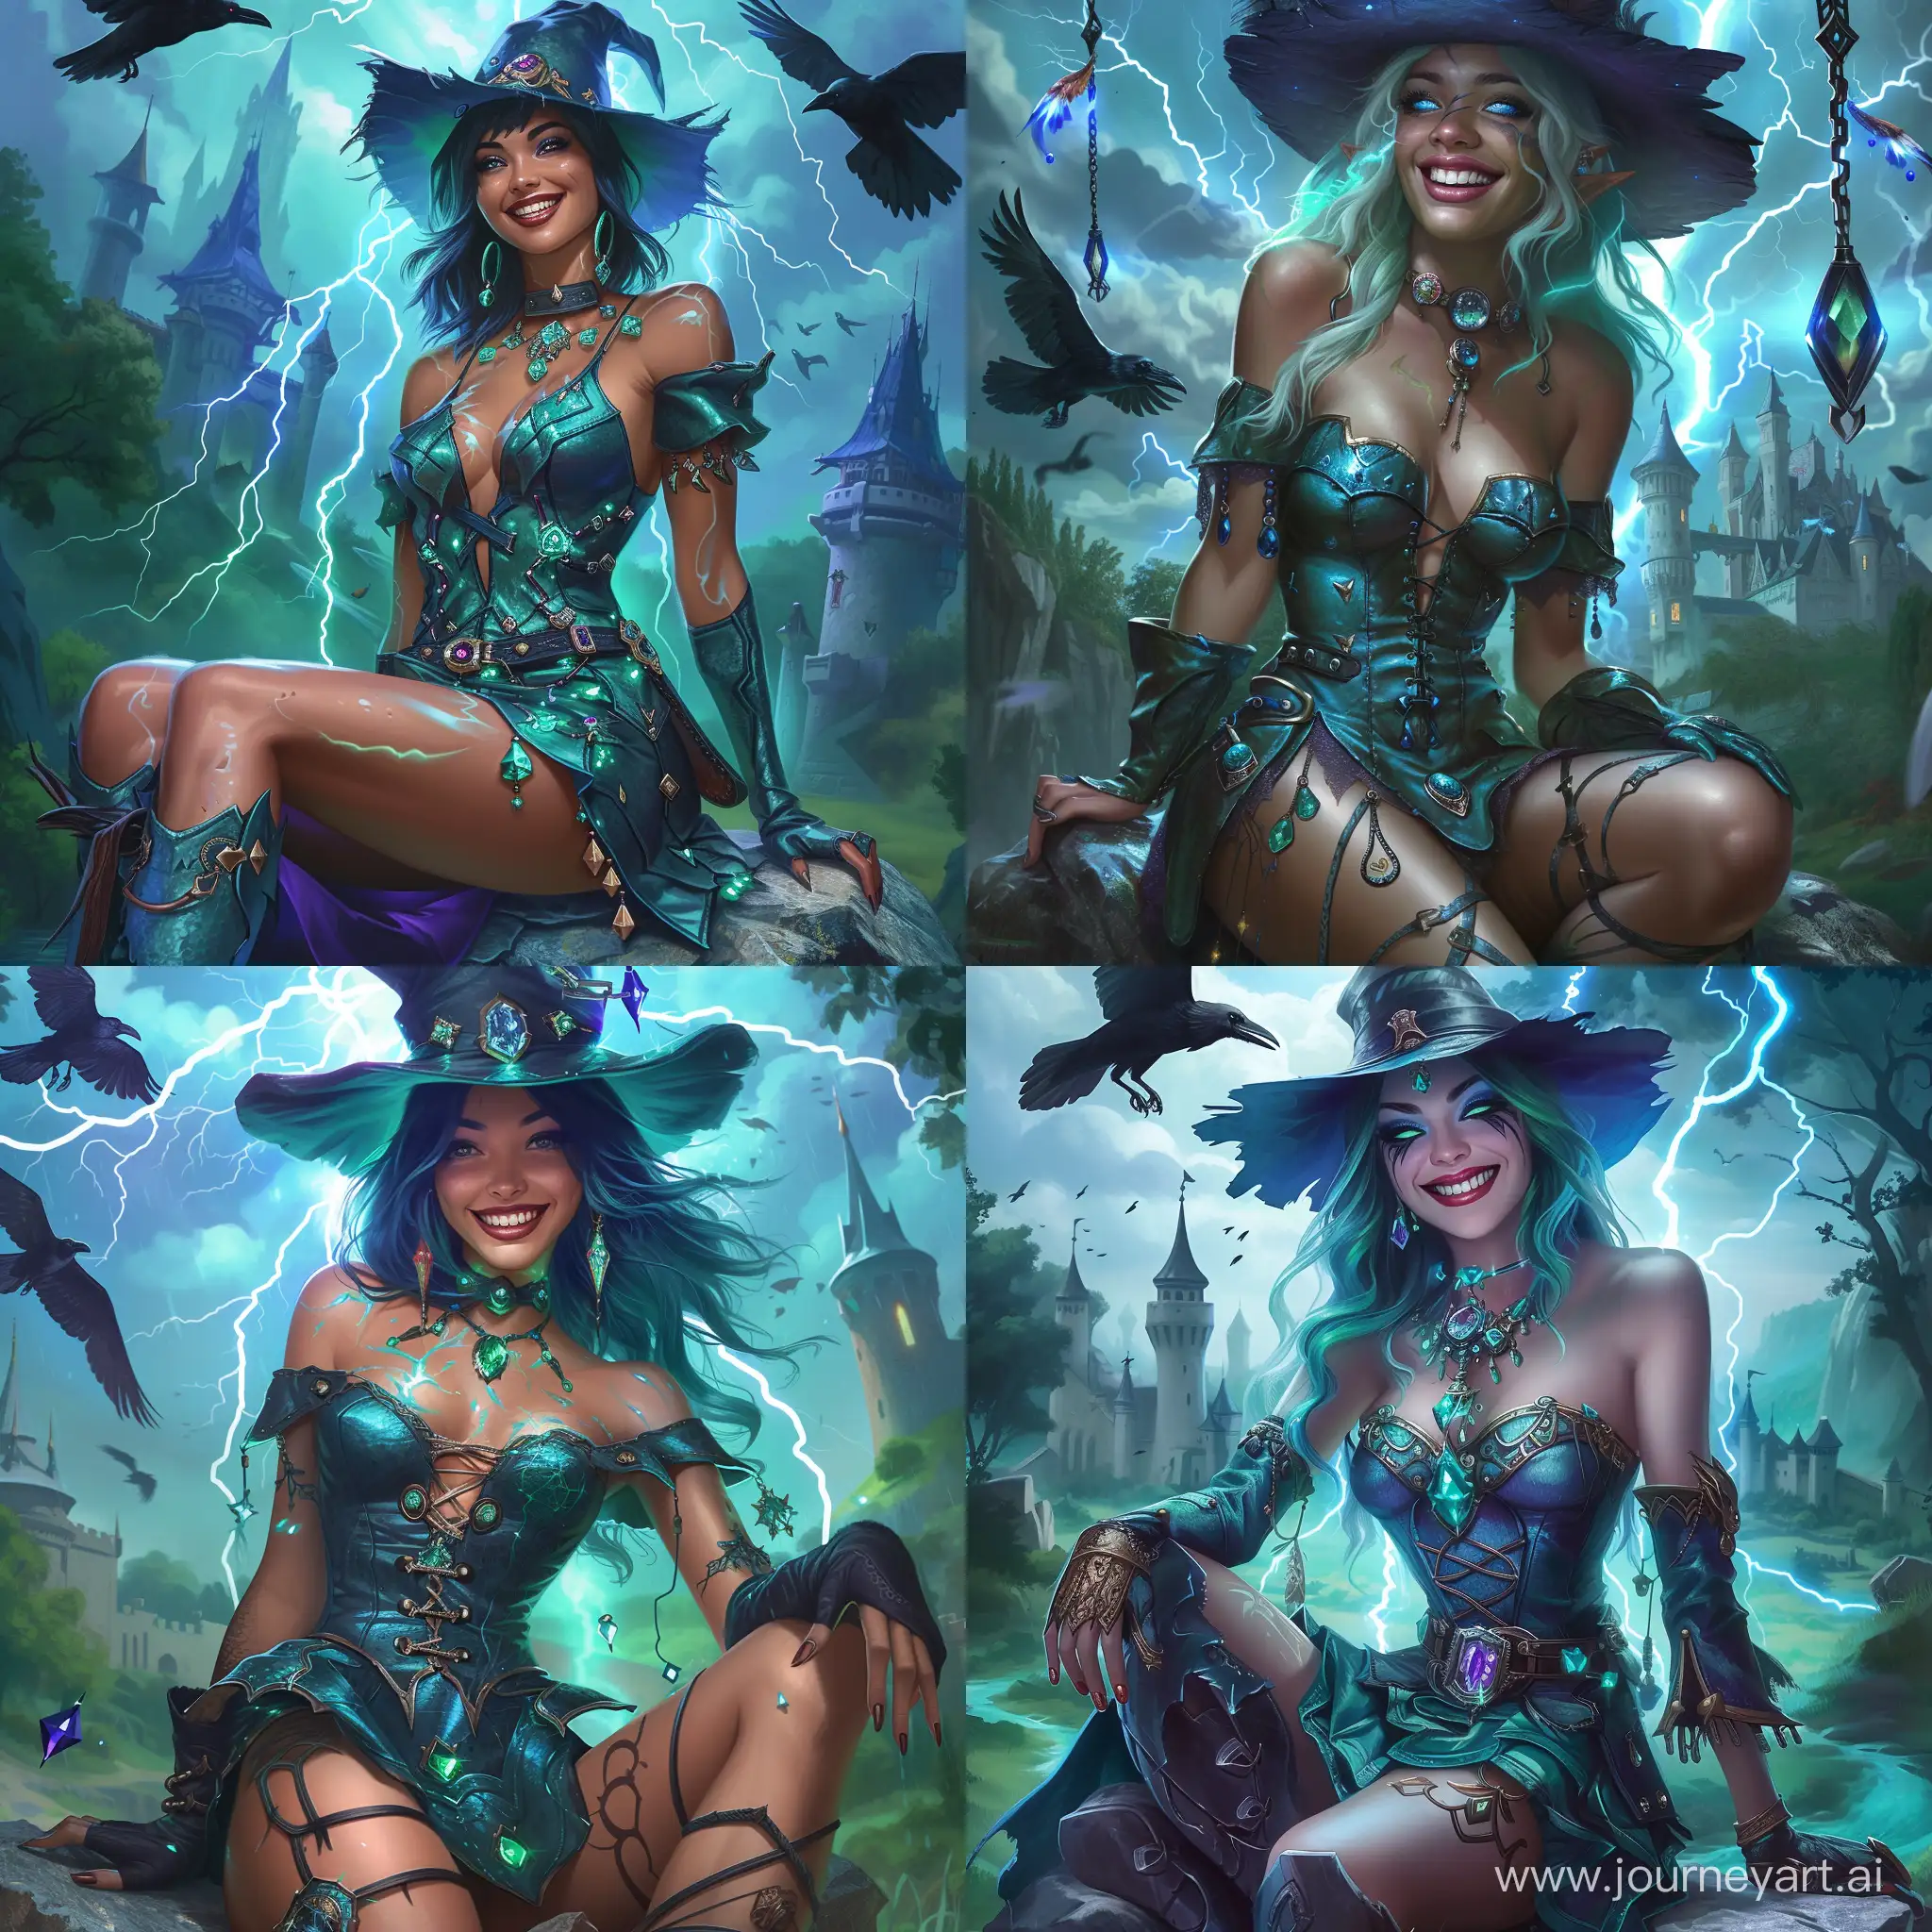 a beautiful and powerful mysterious sorceress, smile, sitting on a rock, lightning magic, hat,
 castle background, digital art, detailed leather clothing with gemstones, dress, elusive expression, 
vibrant blue and green colors, shiny smooth texture, eye level perspective, dramatic shadows, 
featuring a raven flying overhead, Splash art, League of Legends